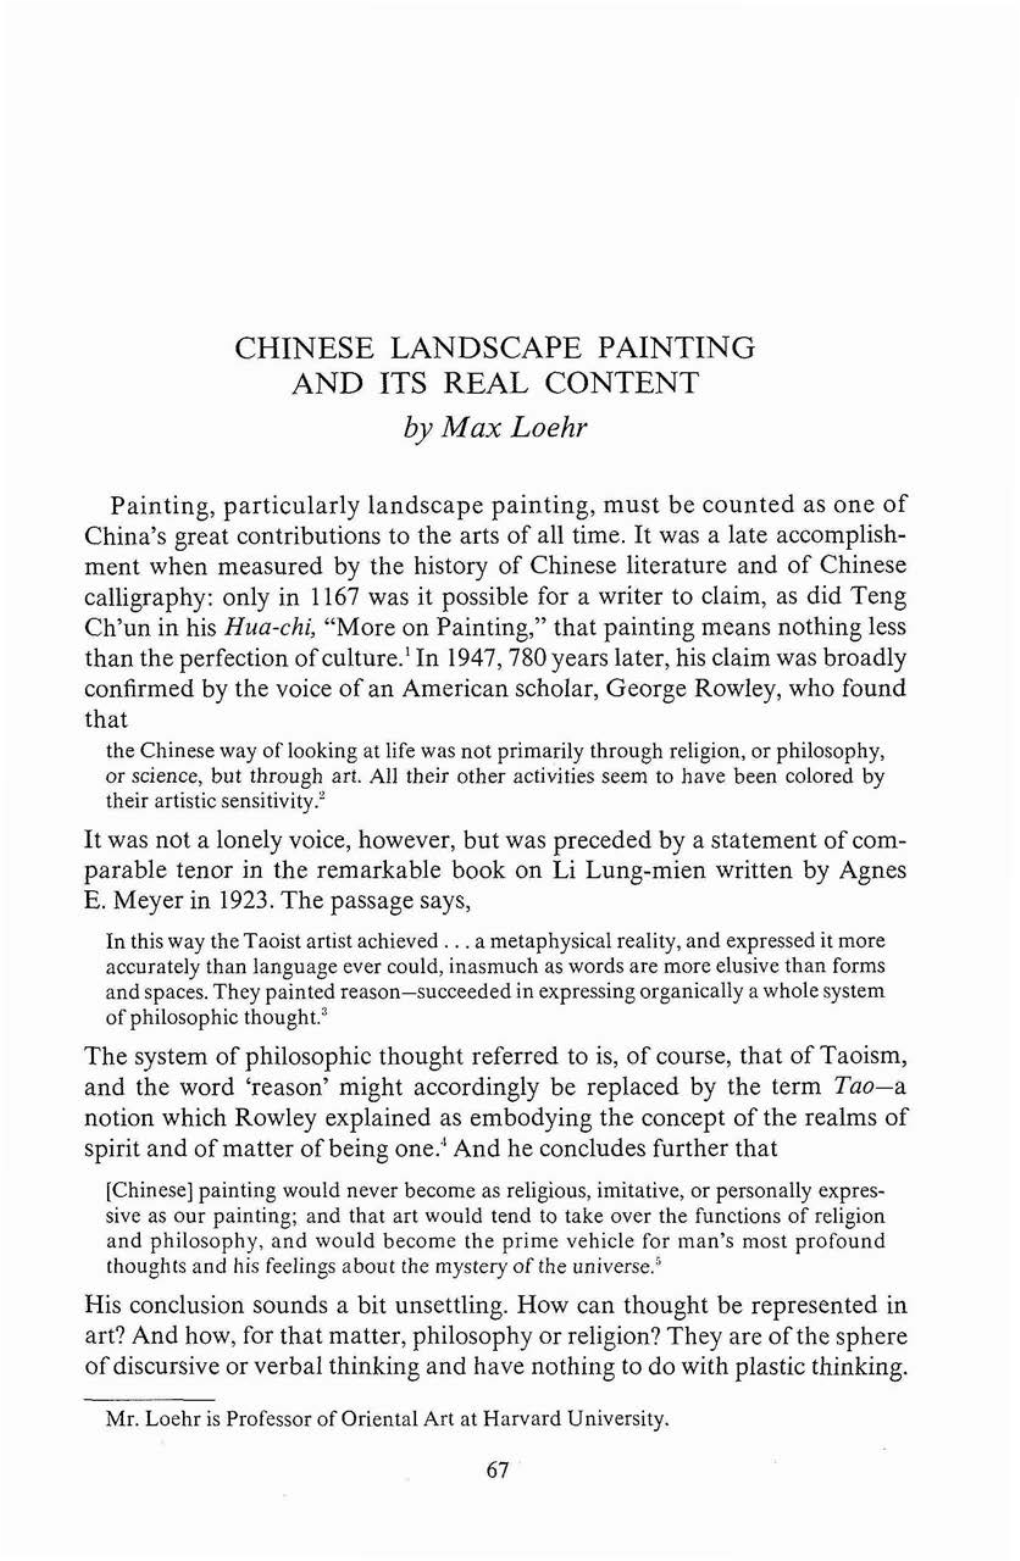 CHINESE LANDSCAPE PAINTING and ITS REAL CONTENT by Max Loehr